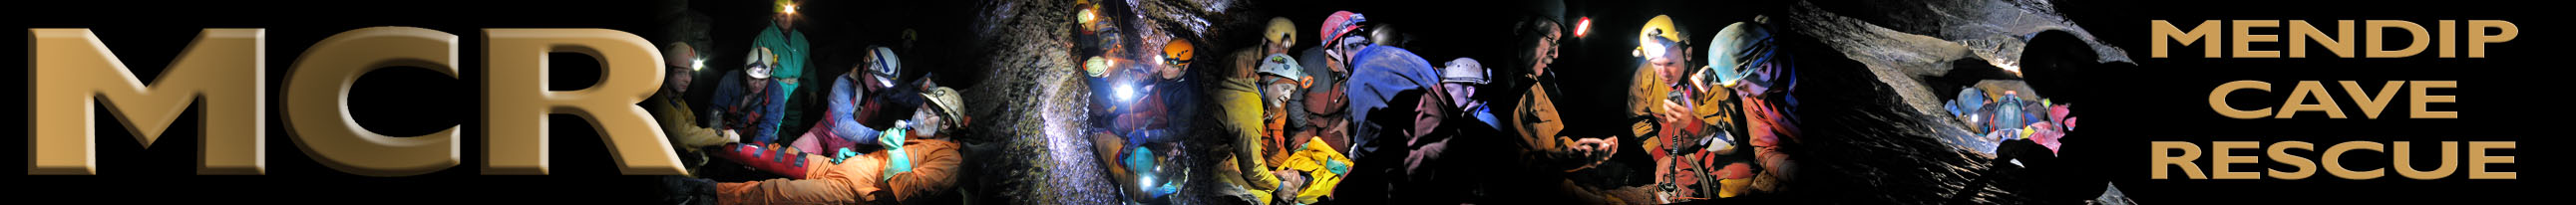 Mendip Cave Rescue (registered charity number 1192357)